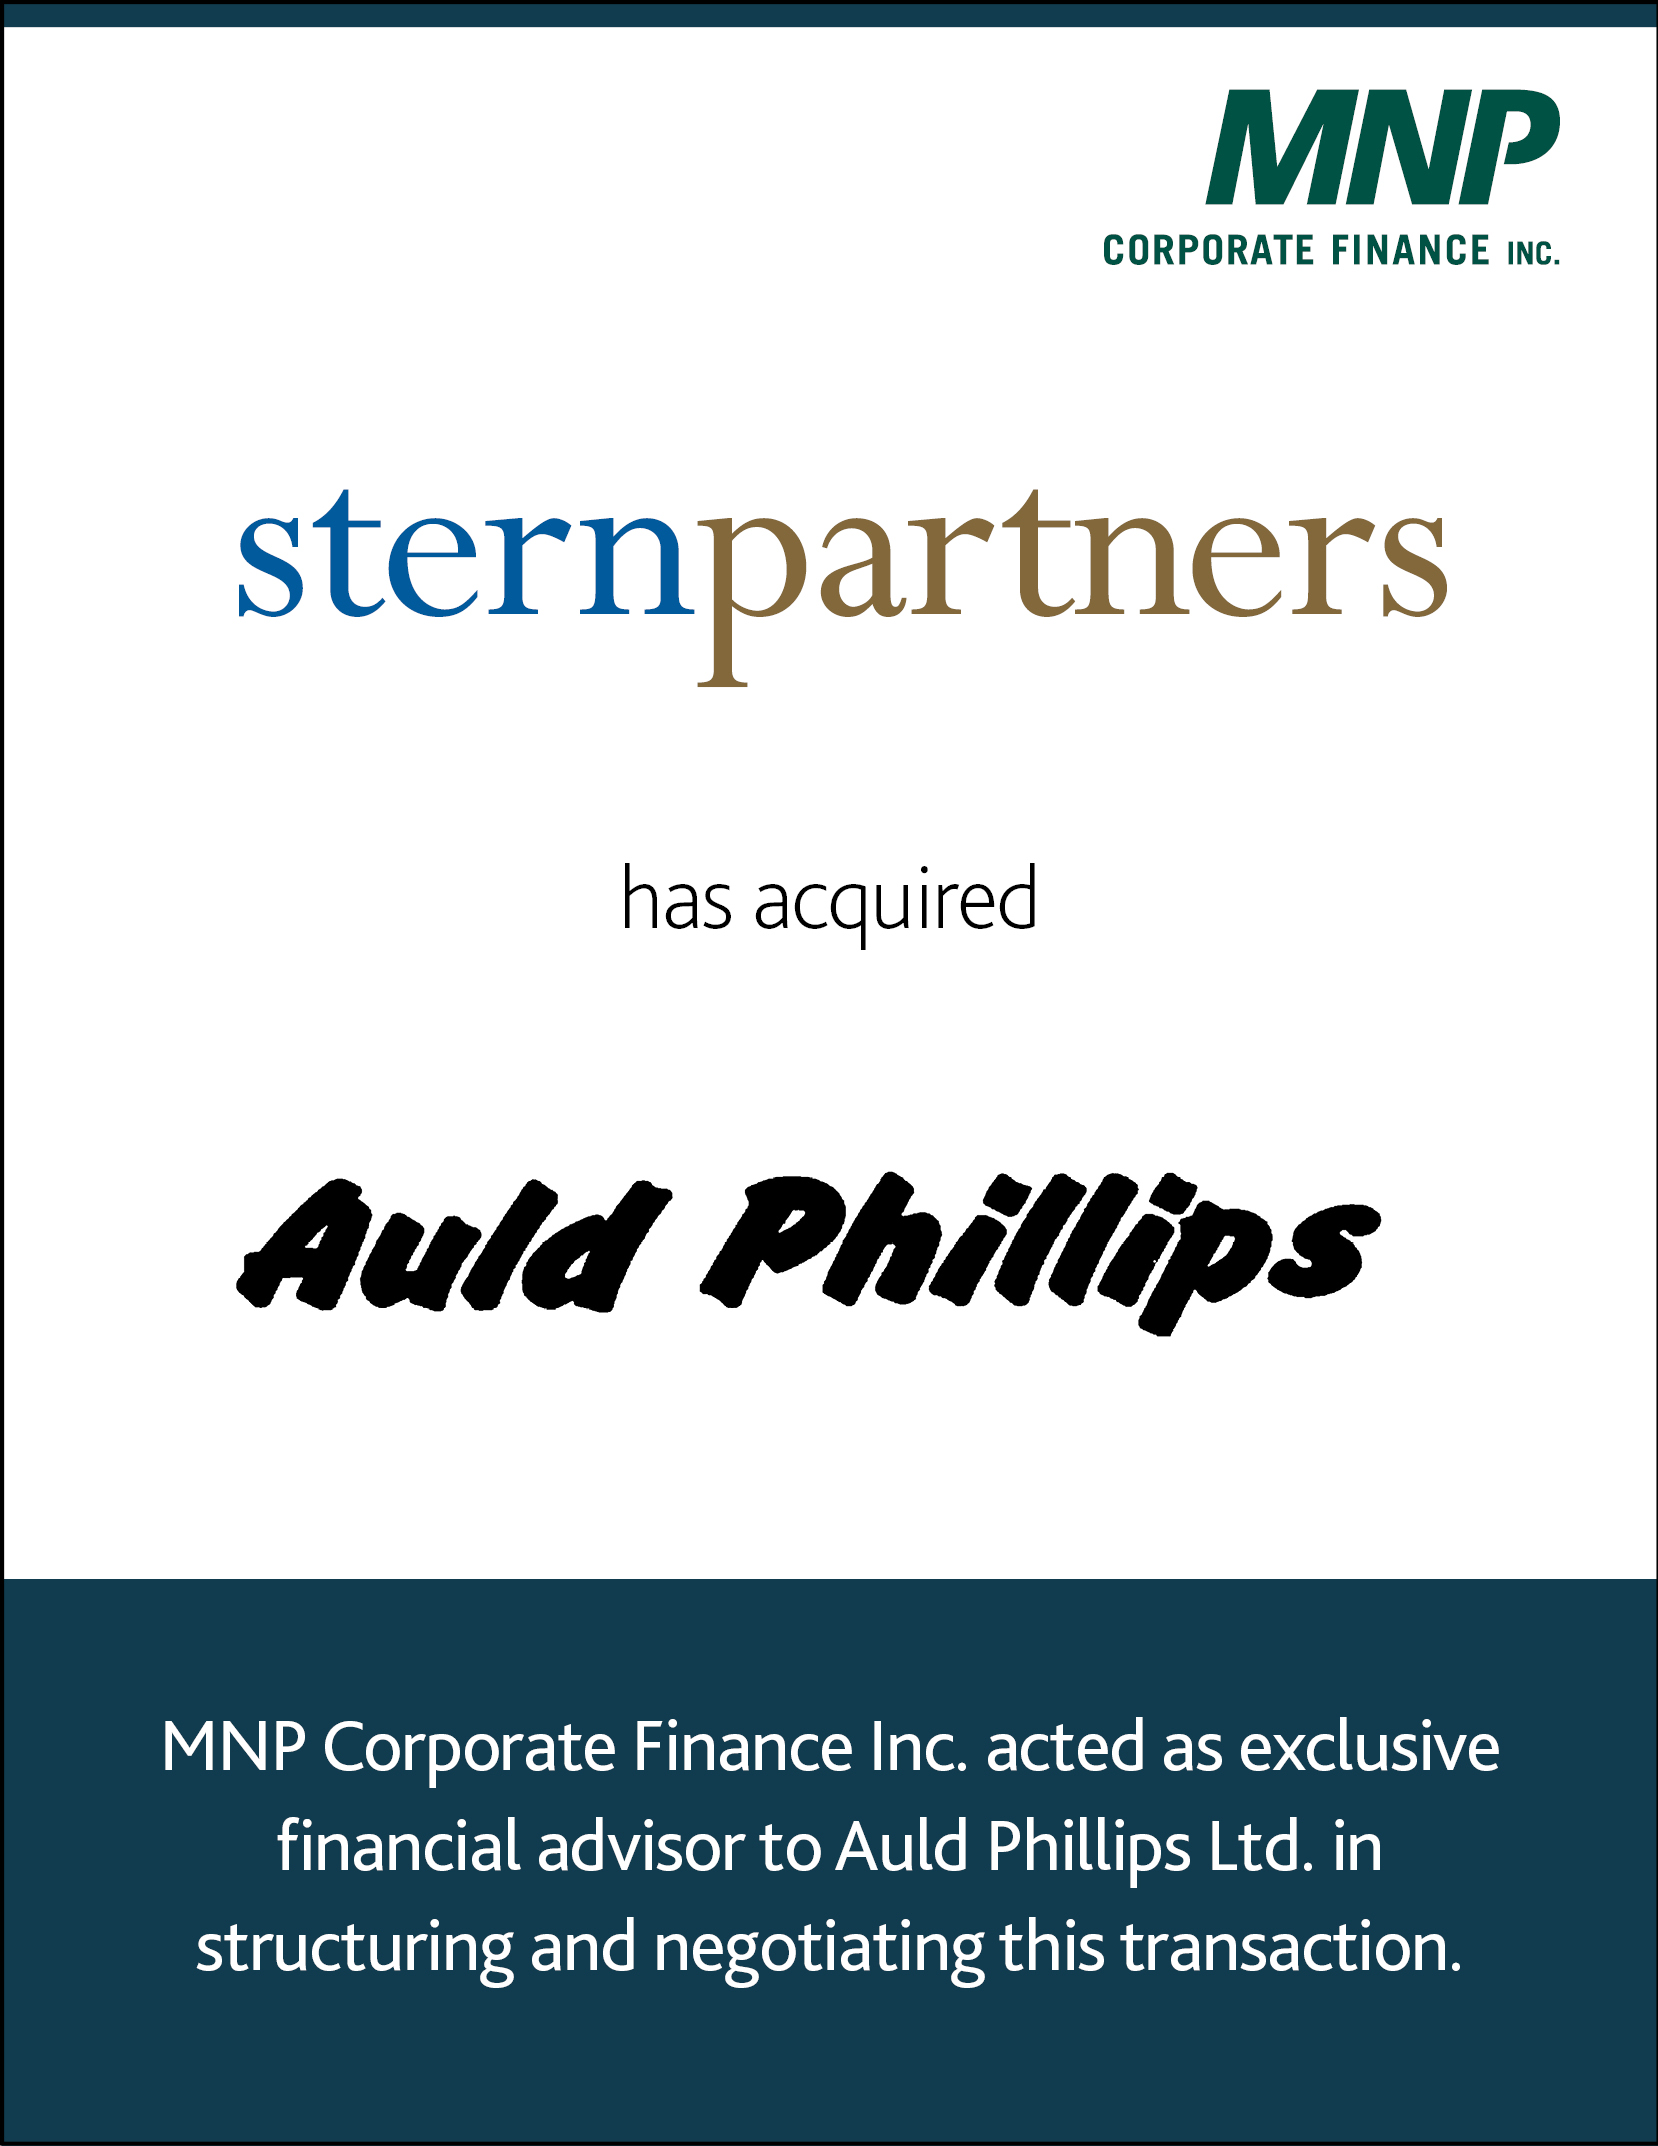 Stern Partners has acquired Auld Phillips 